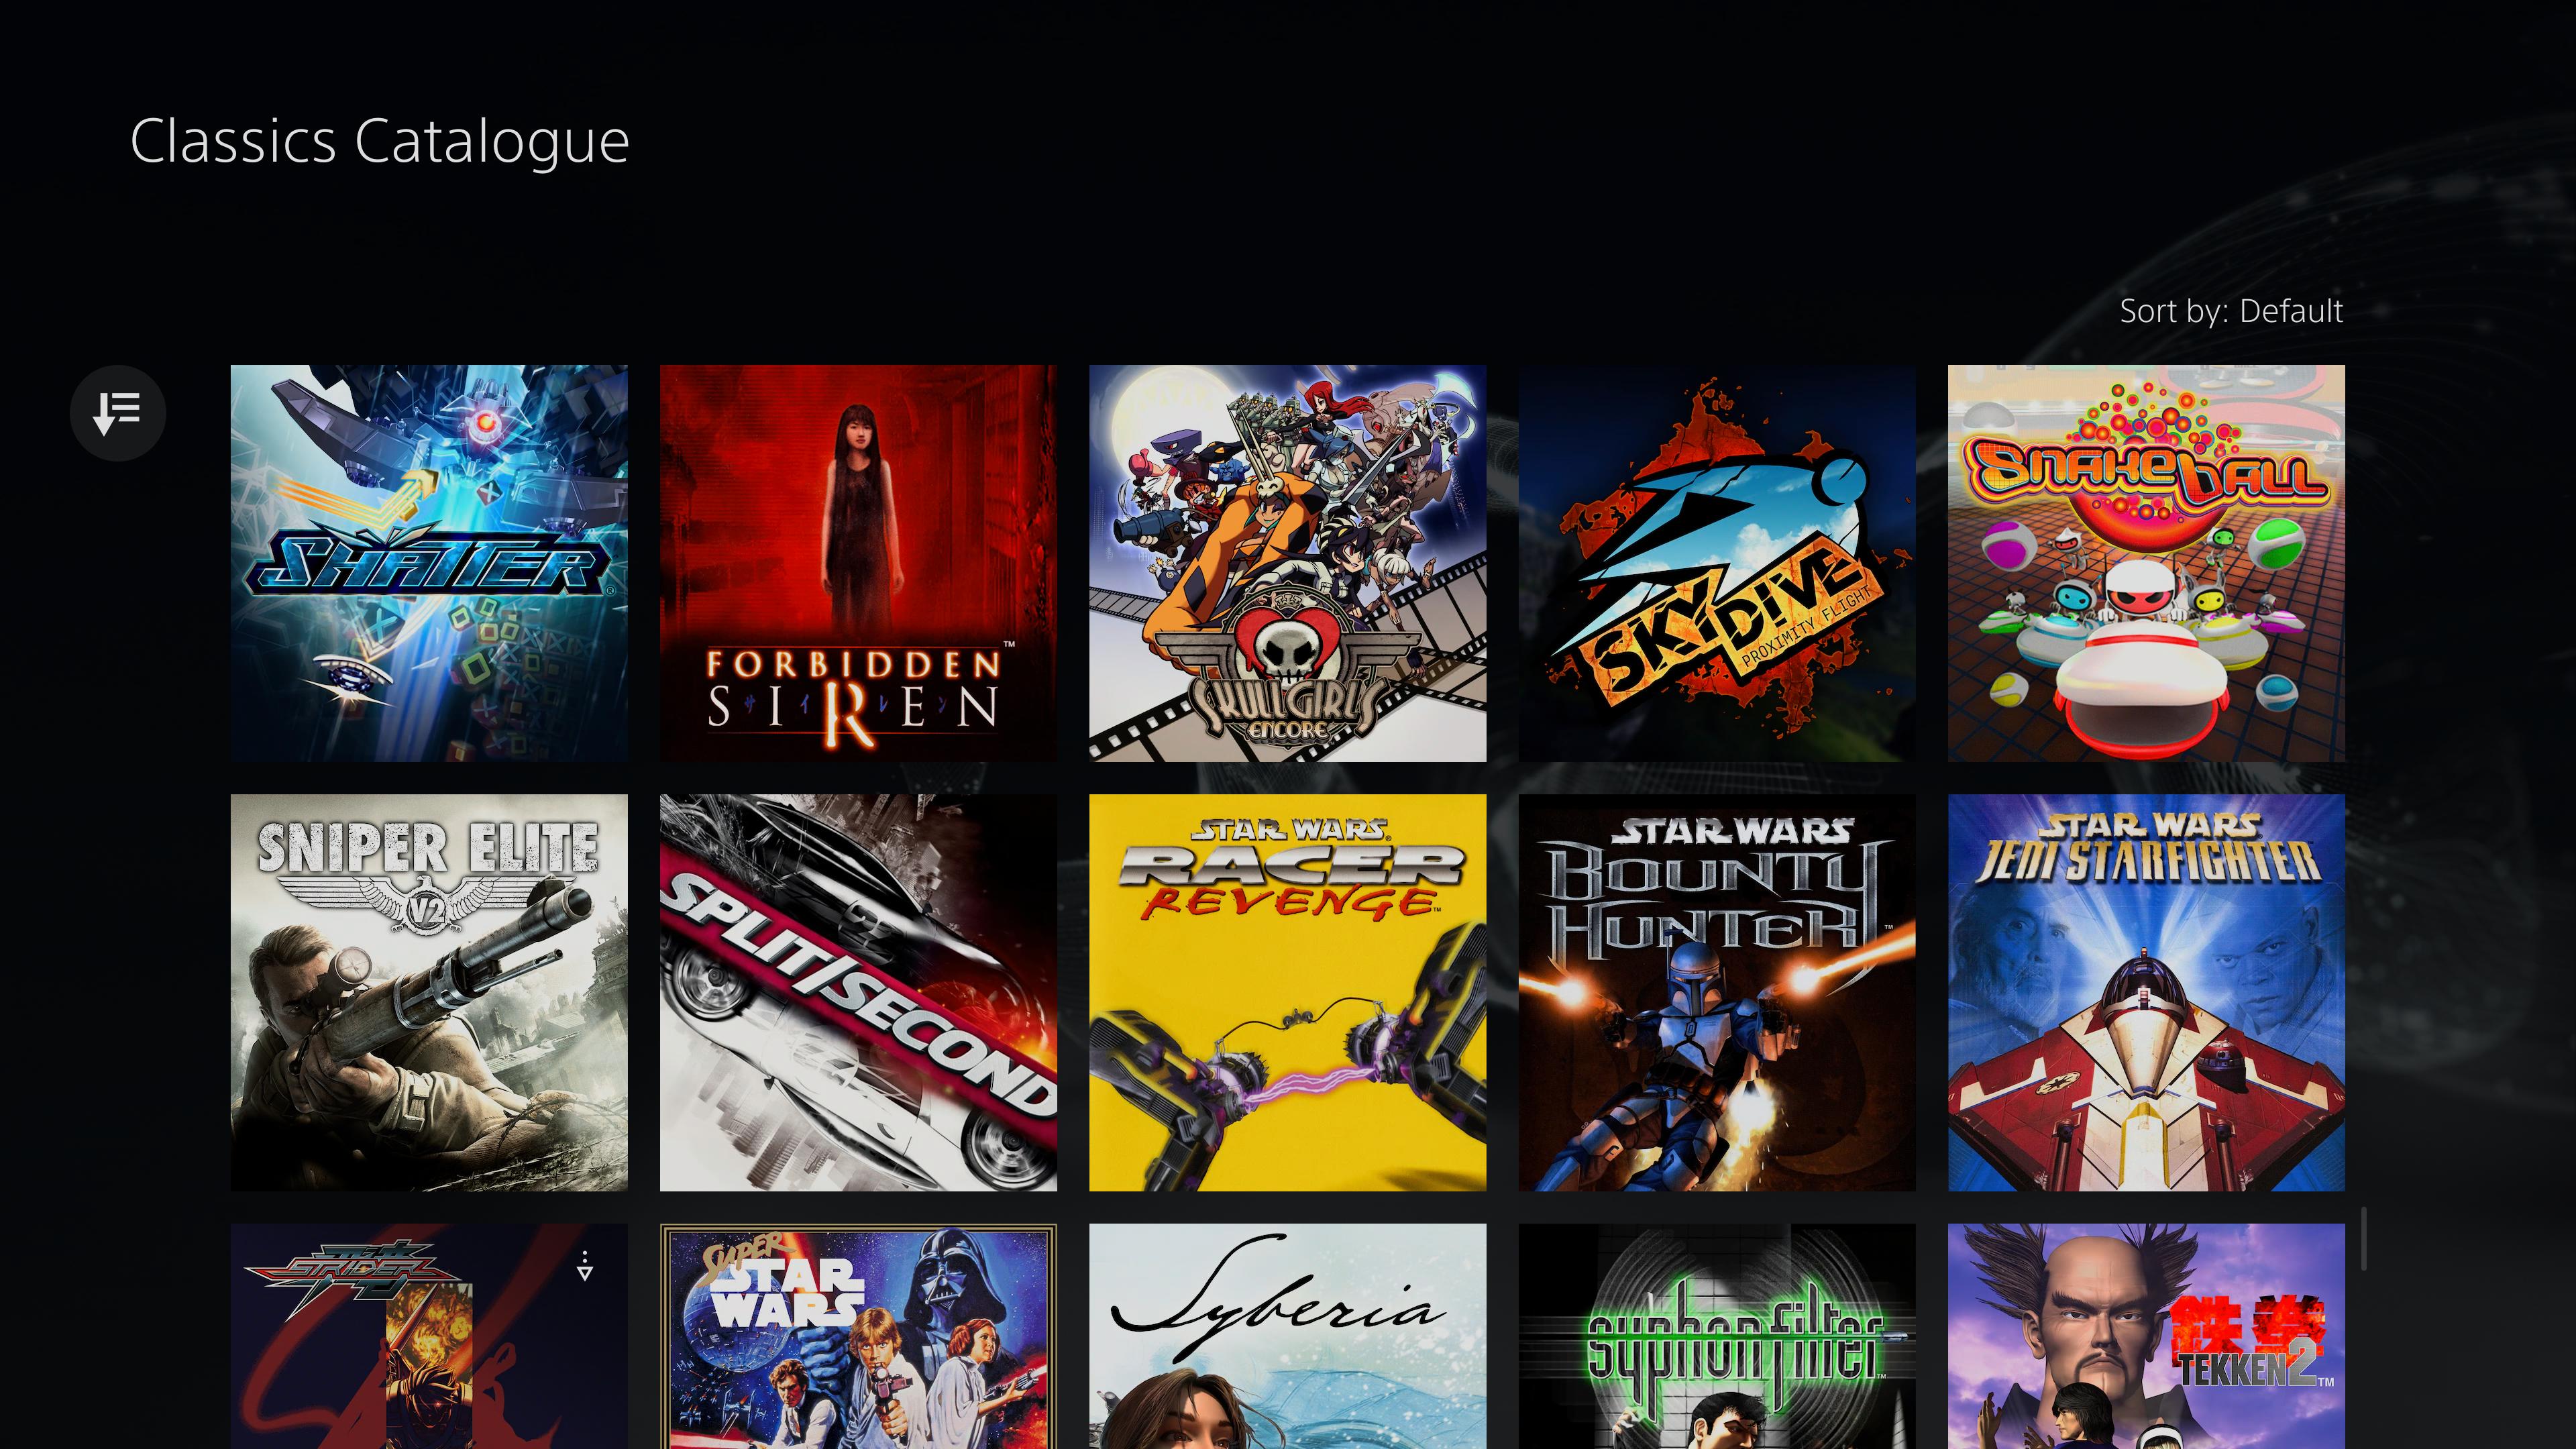 PS Plus - some gems in the classics catalogue like Star Wars Jedi Starfighter, Bounty Hunter, and Racer Revenge